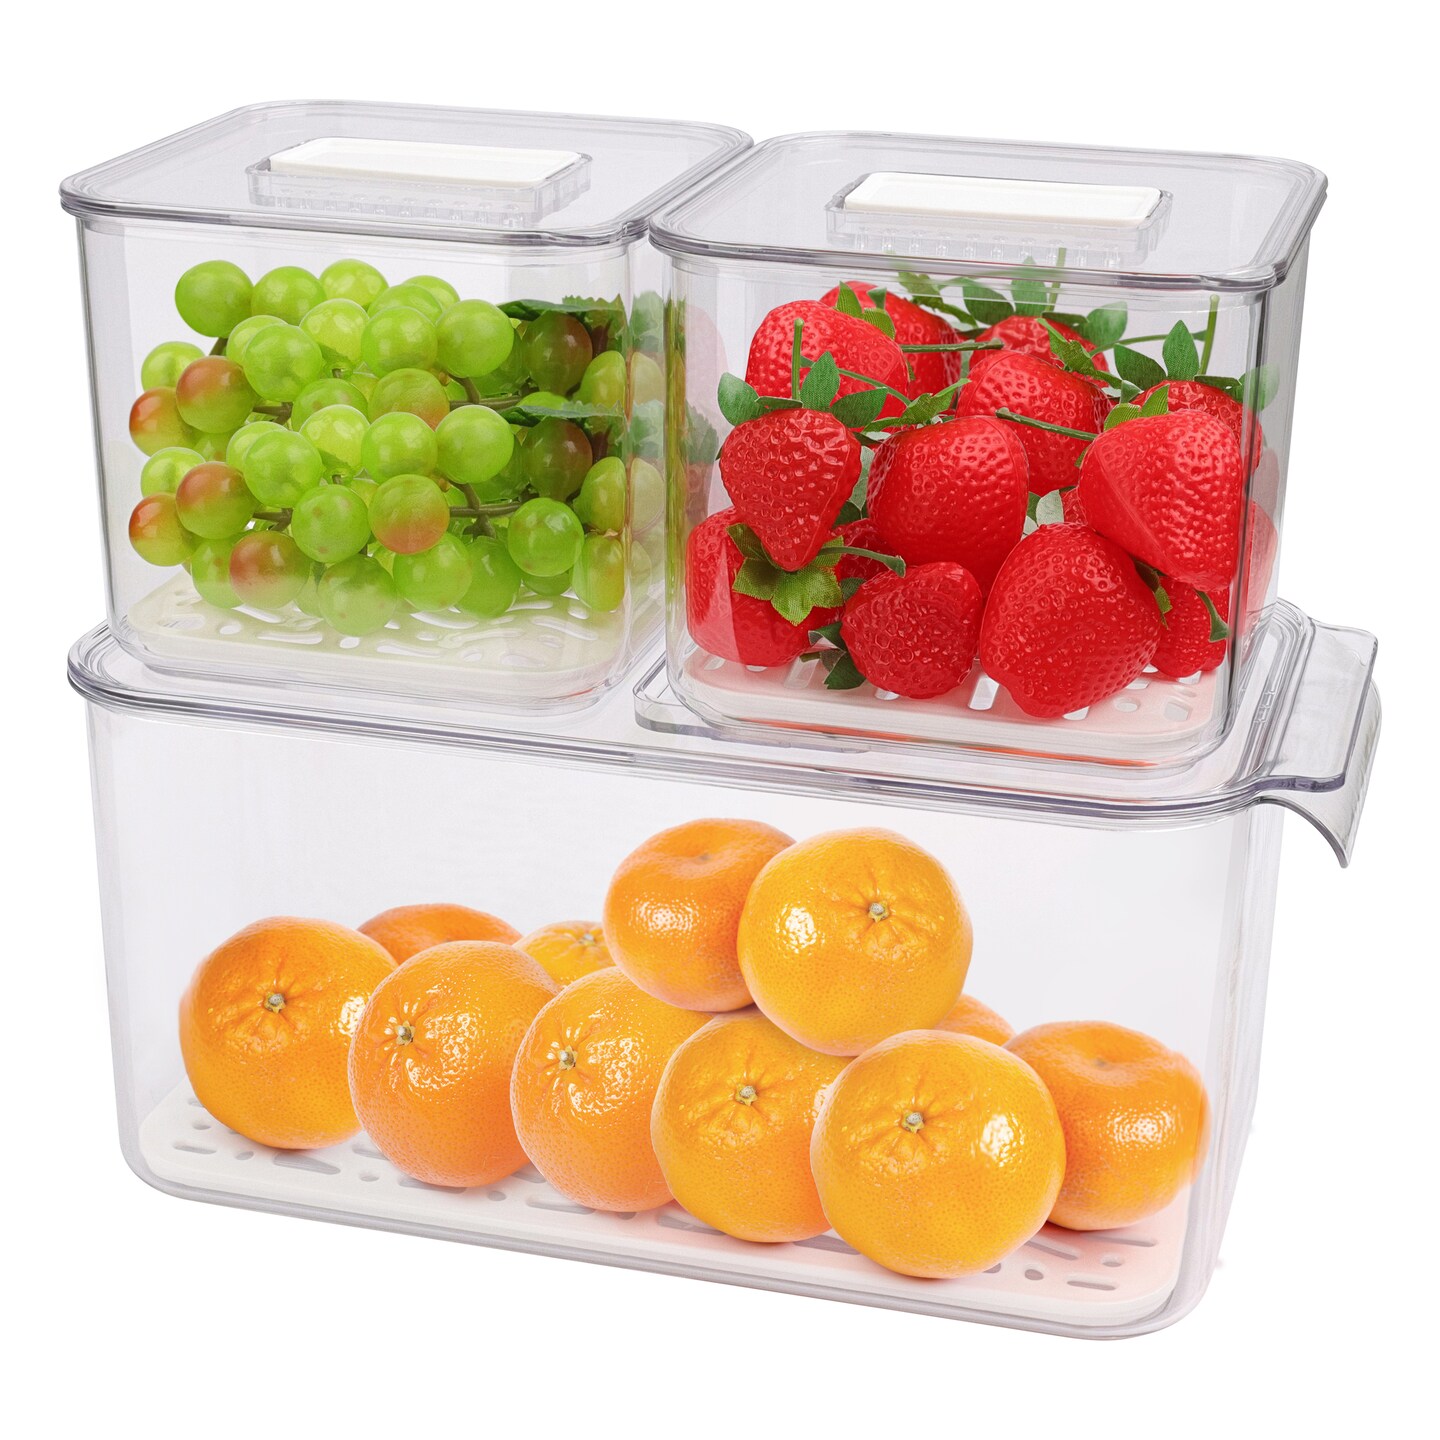 7Penn Refrigerator Produce Storage Containers - 3pc Stackable Freshness Extender